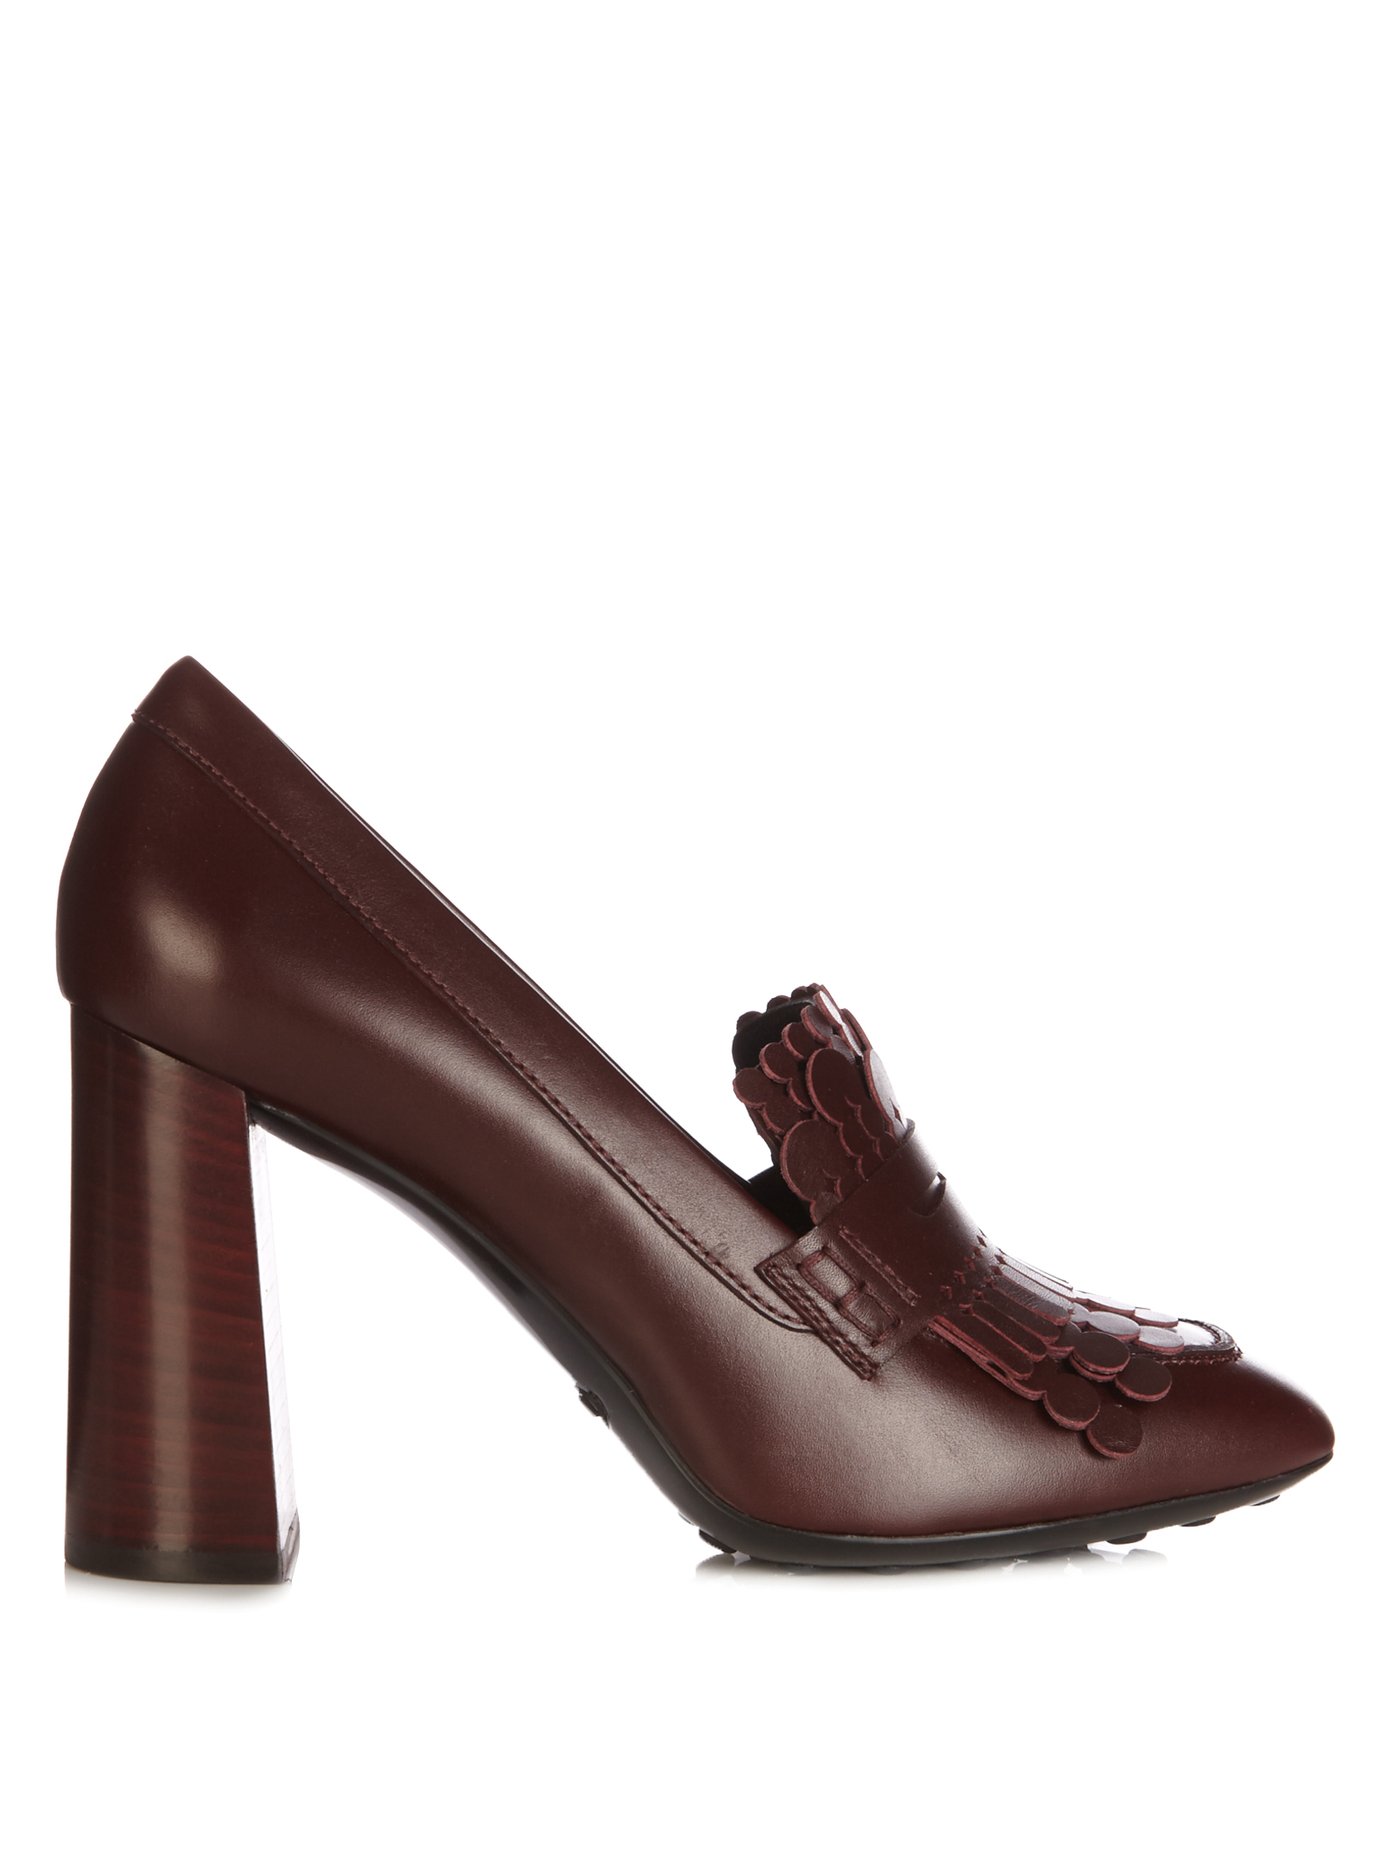 tod's fringed leather pumps